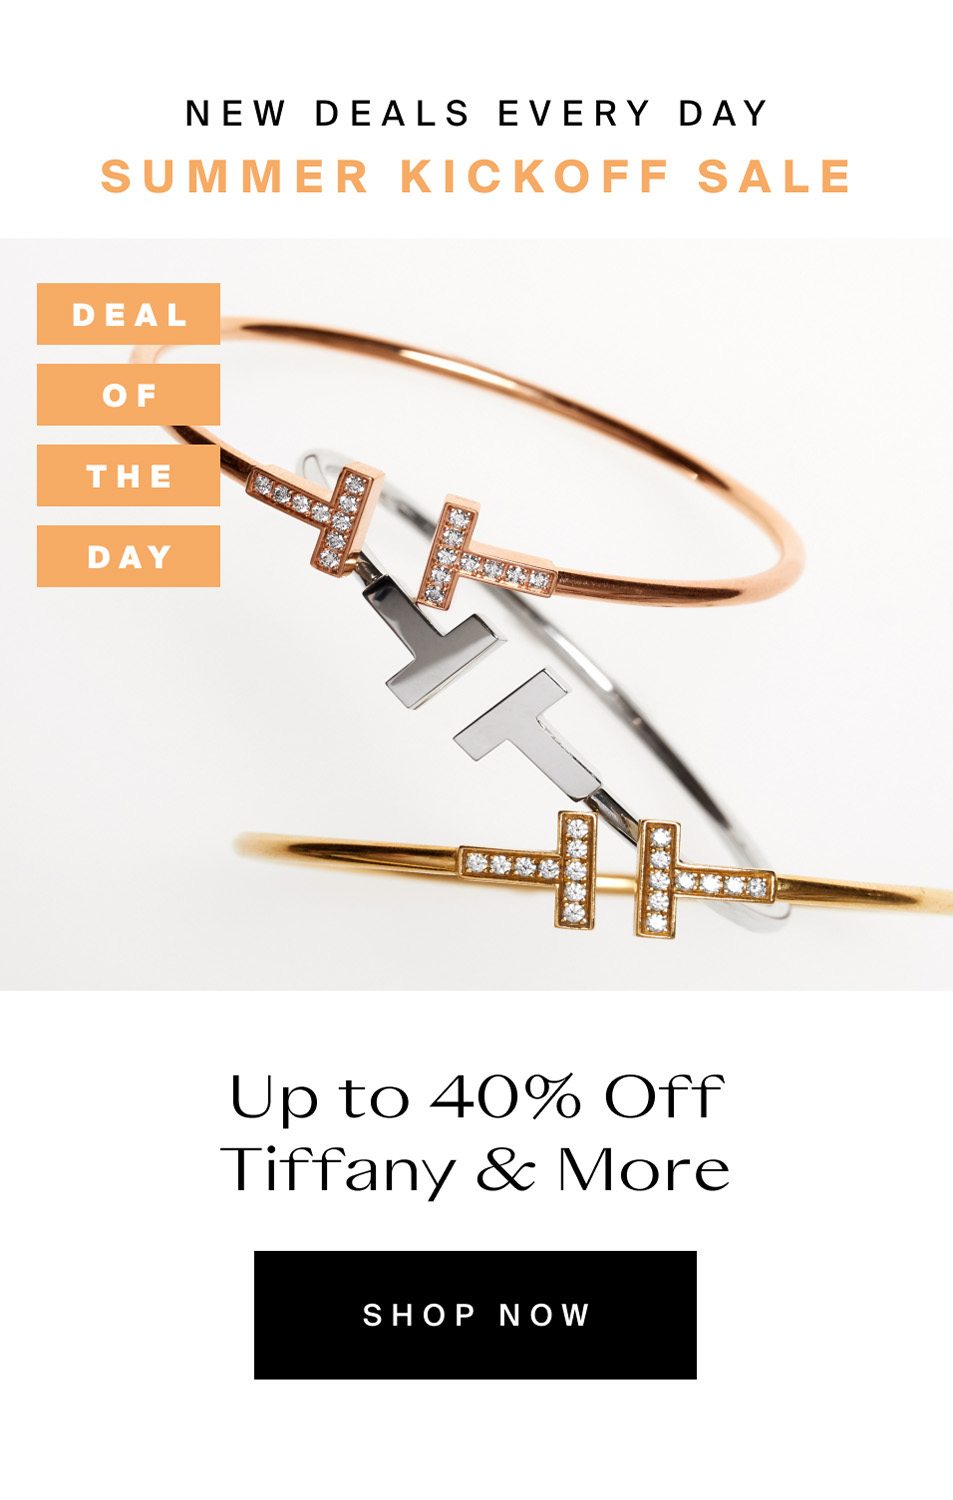 Deal of The Day: Tiffany & Co